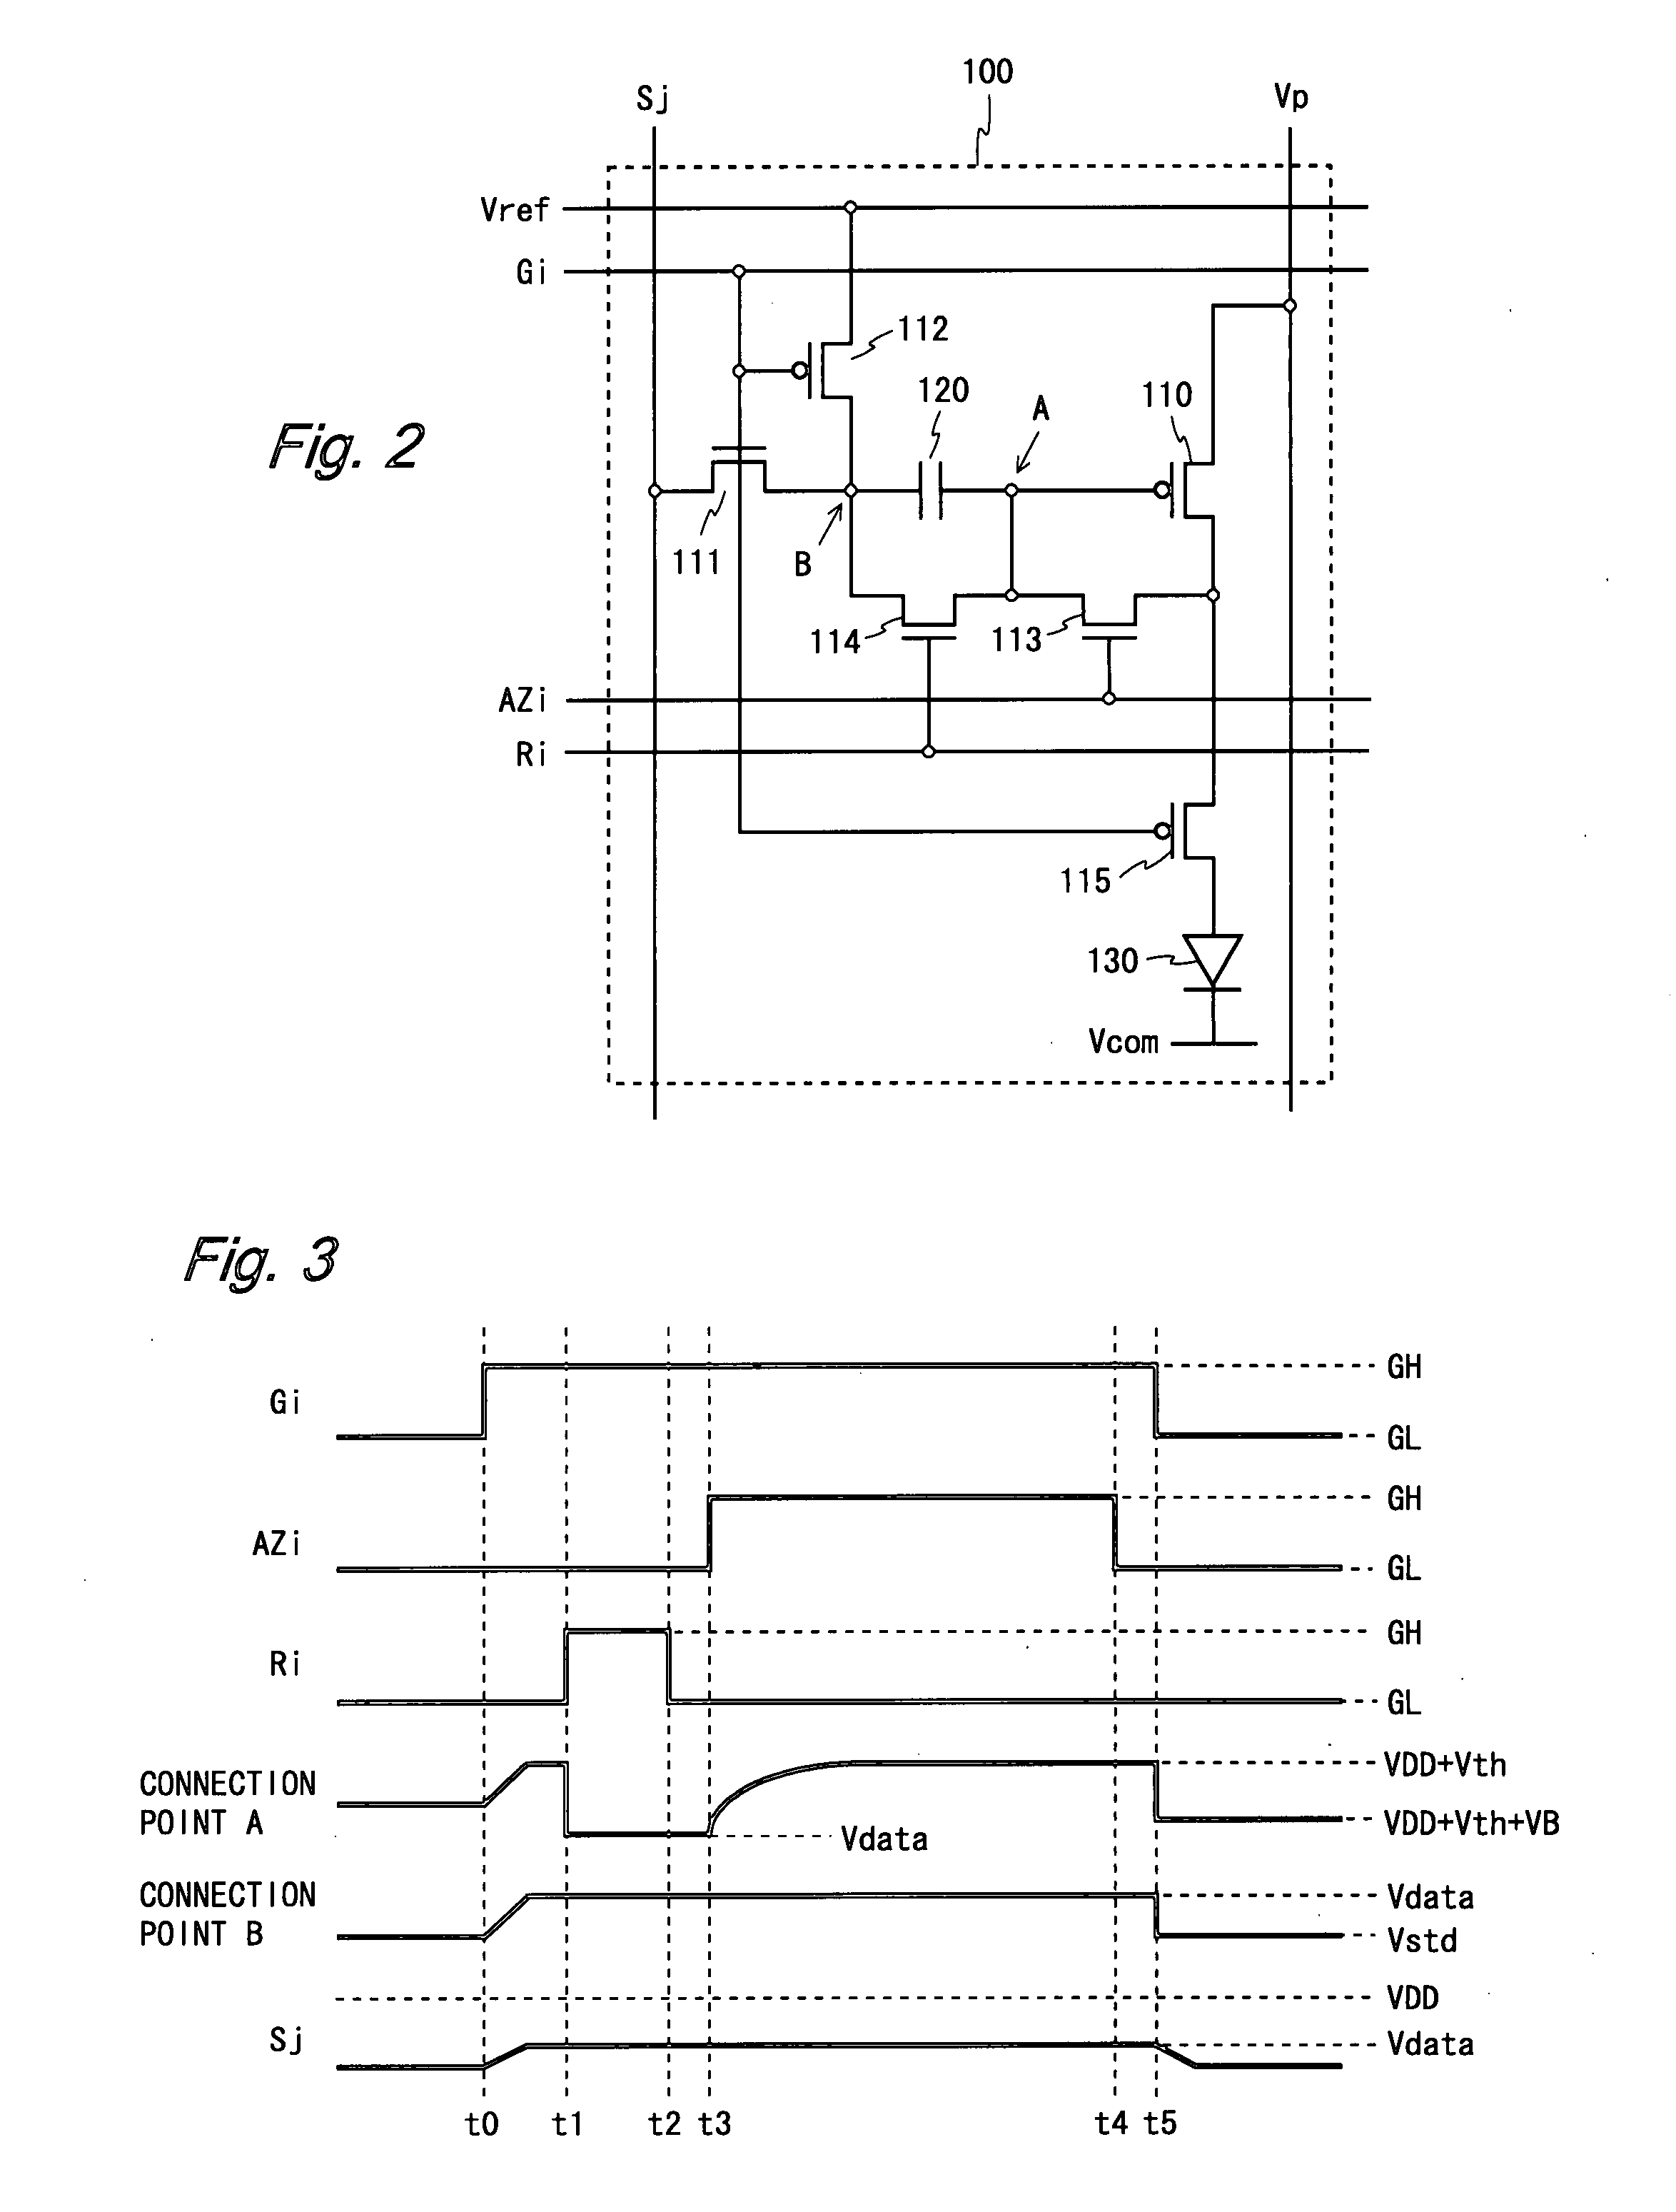 Current-driven display device